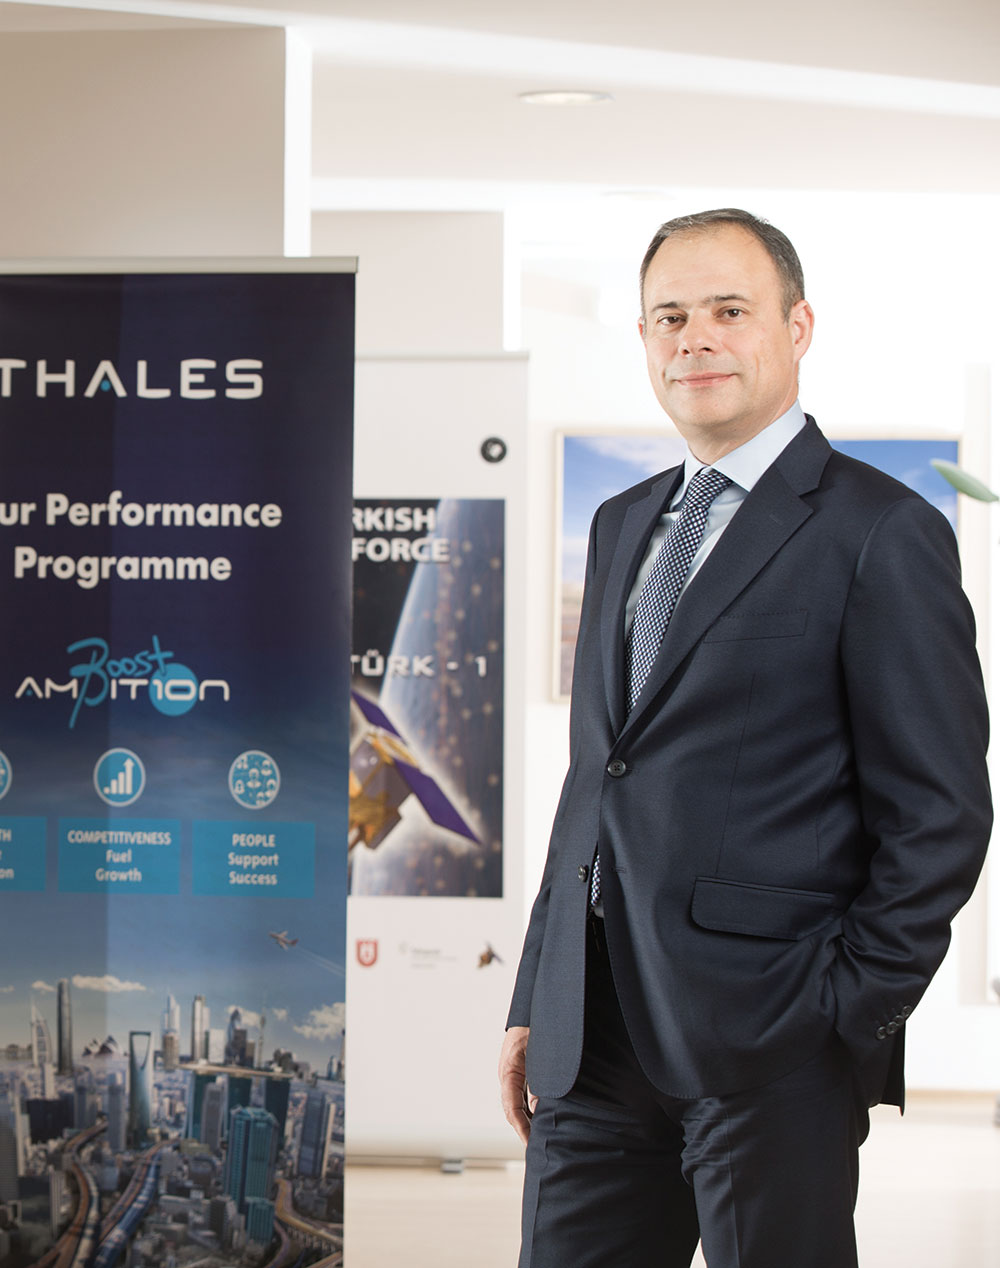 Thales, an Ideal Partner for Turkey - Technological Cooperation Addressing Local and Export Markets with Turkish Industry